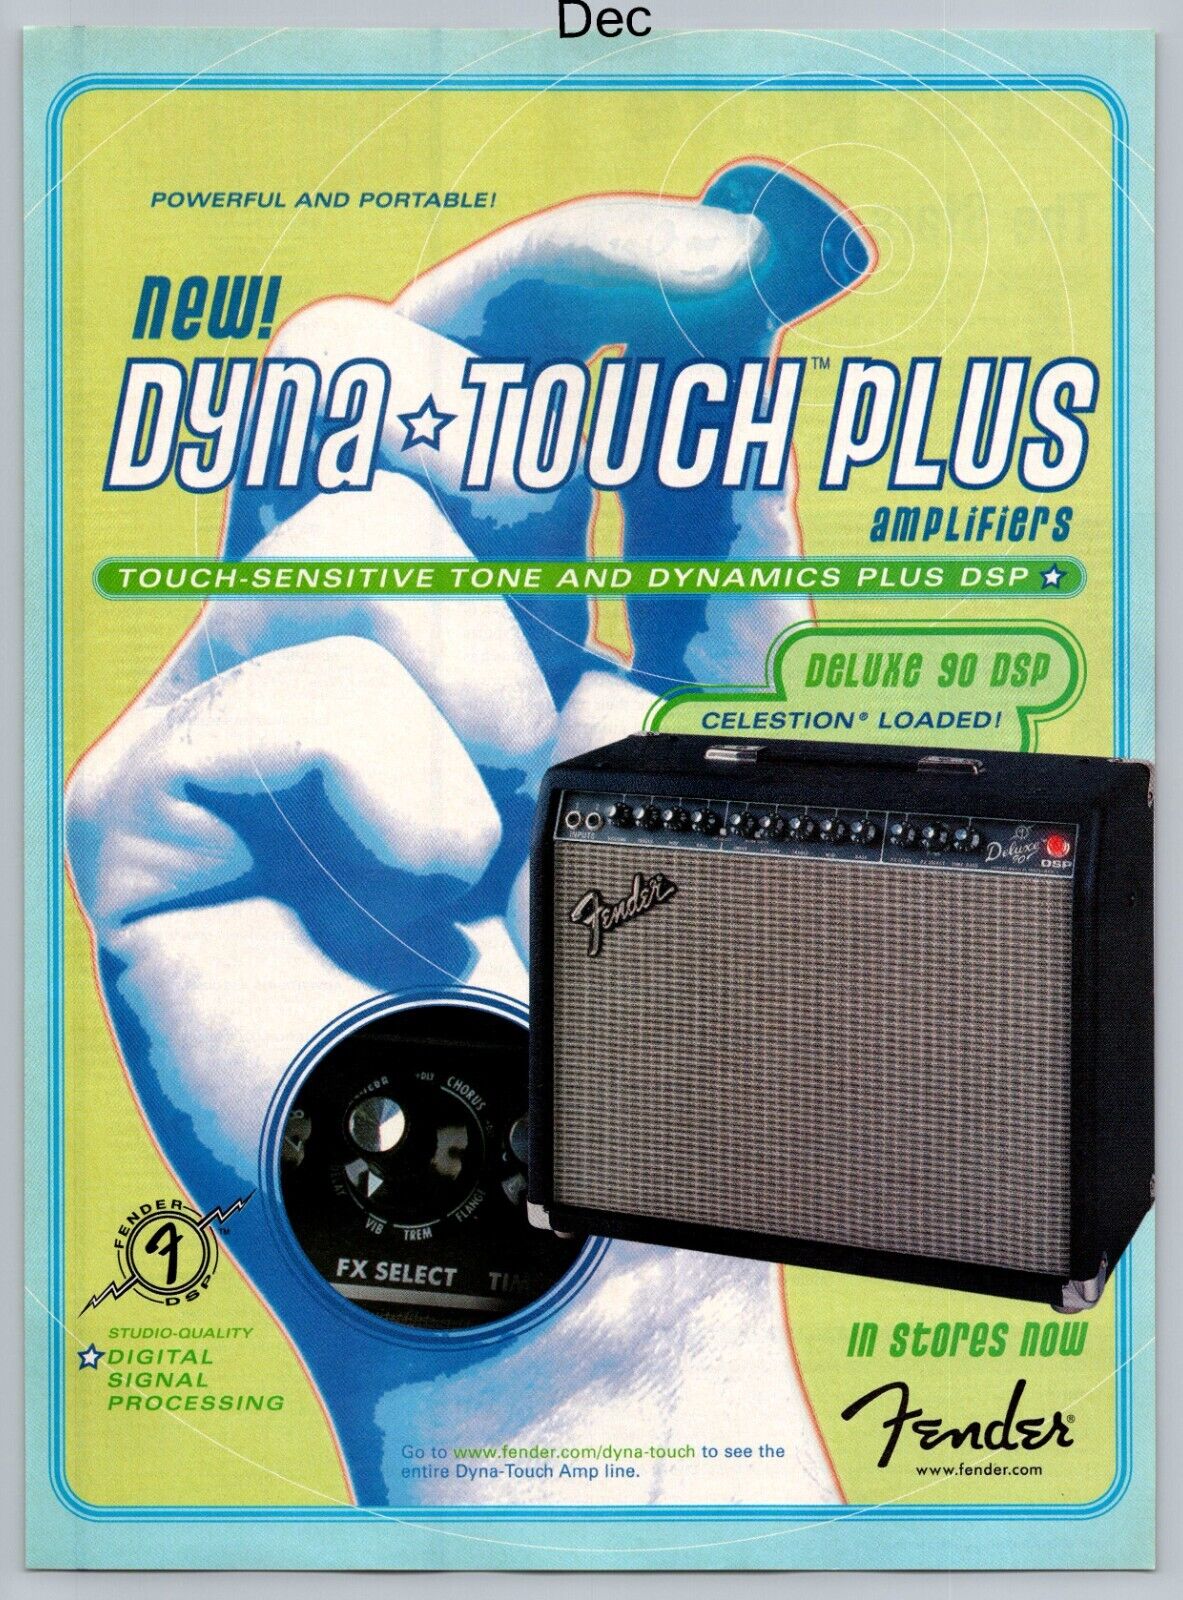 Fender Dyna Touch Plus Amplifiers Digital Processing 2002 Full Page Print Ad